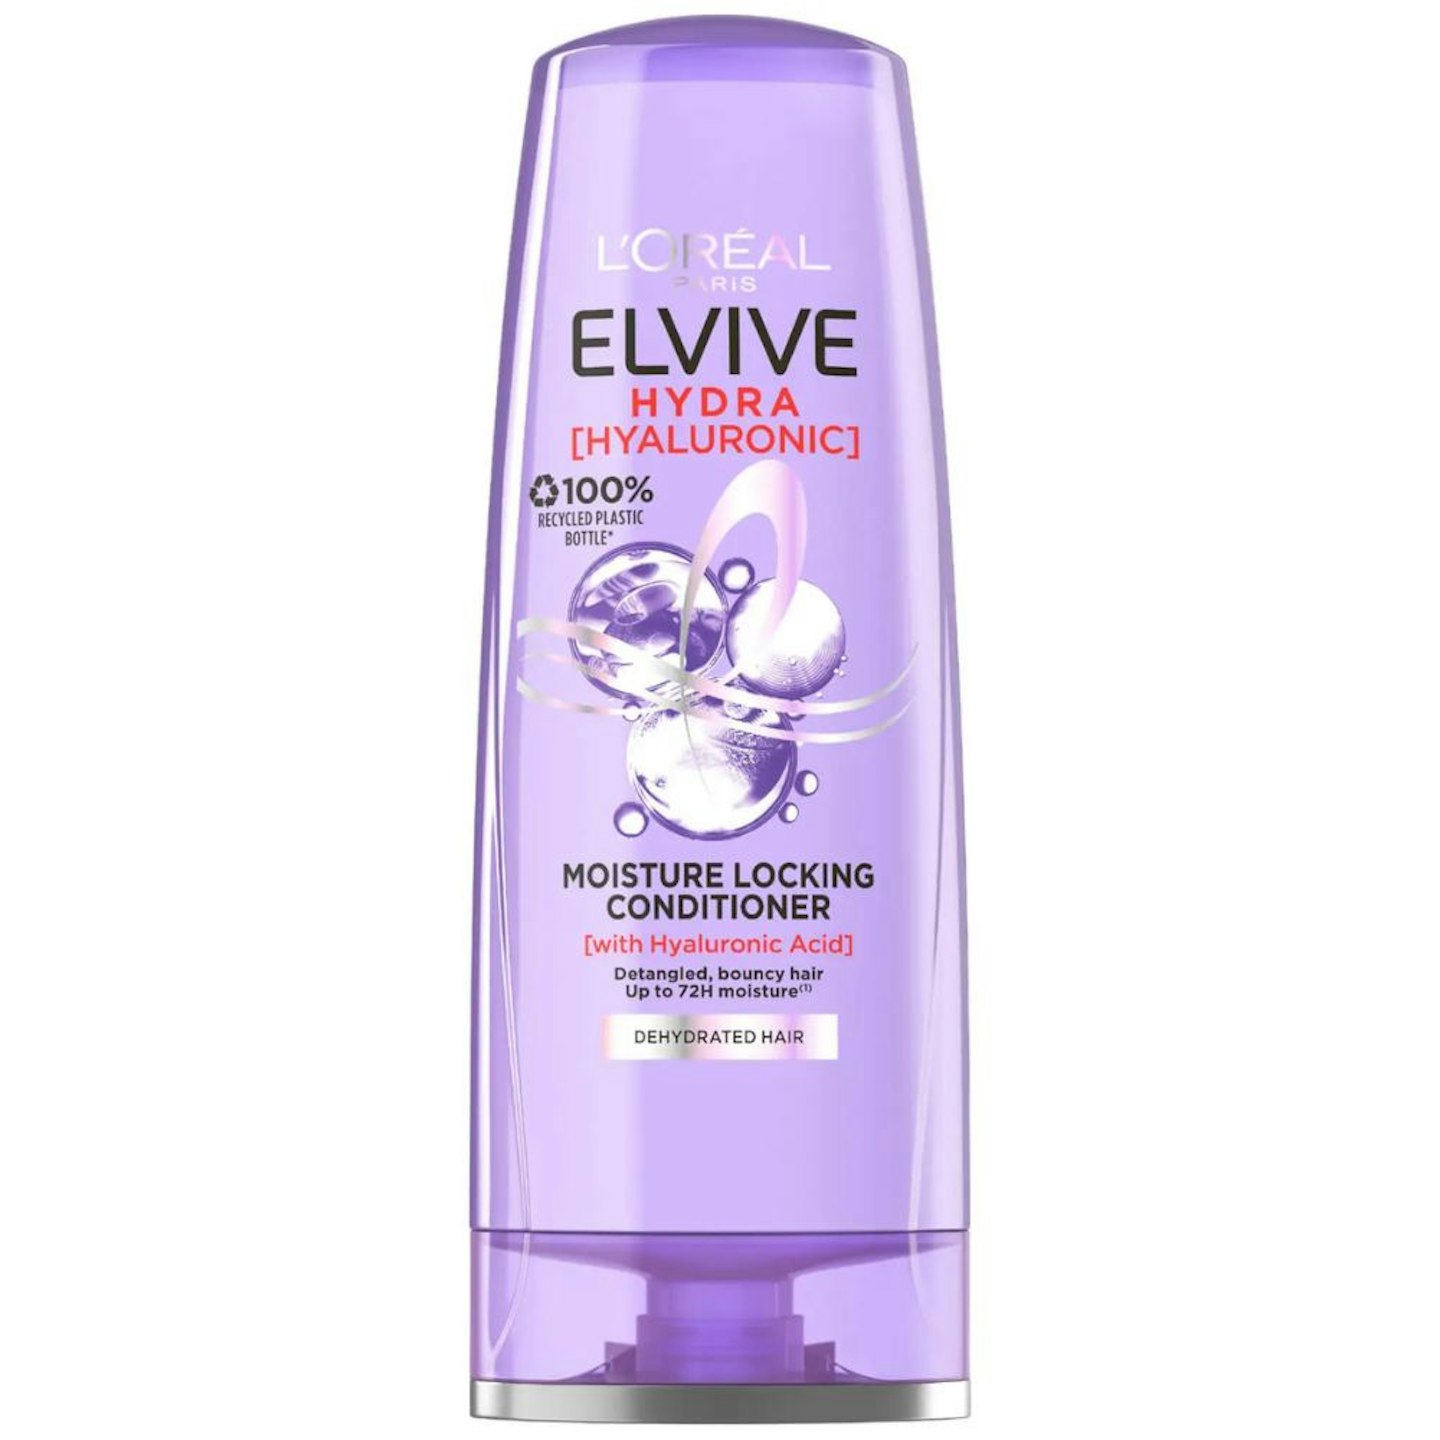 L'Oreal Elvive Hydra Hyaluronic Acid Conditioner